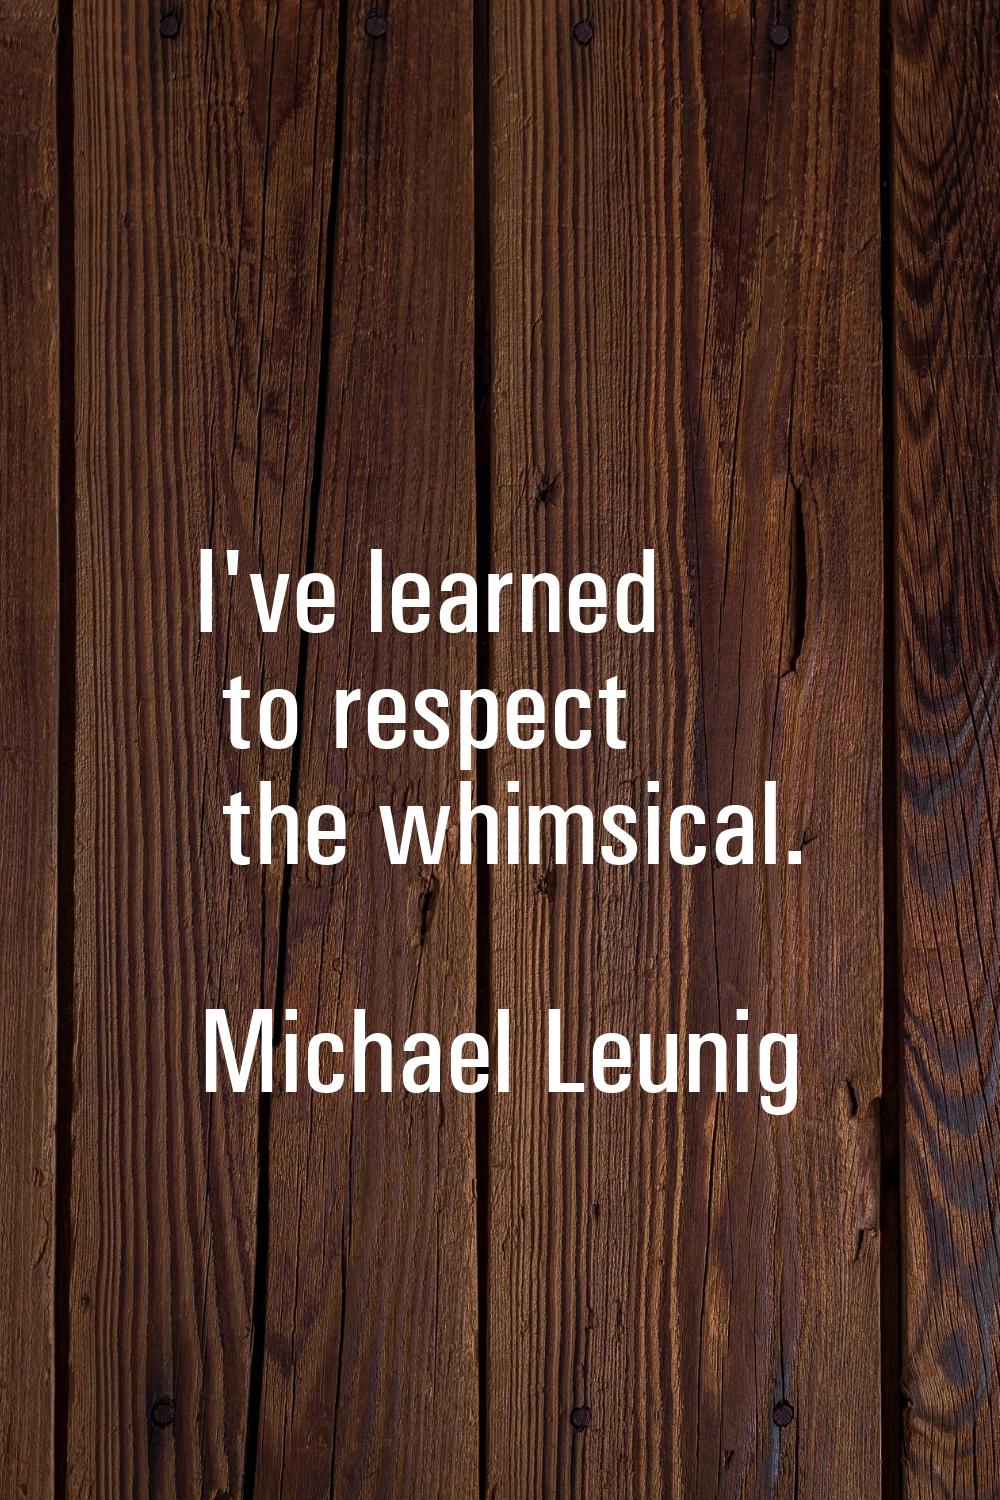 I've learned to respect the whimsical.